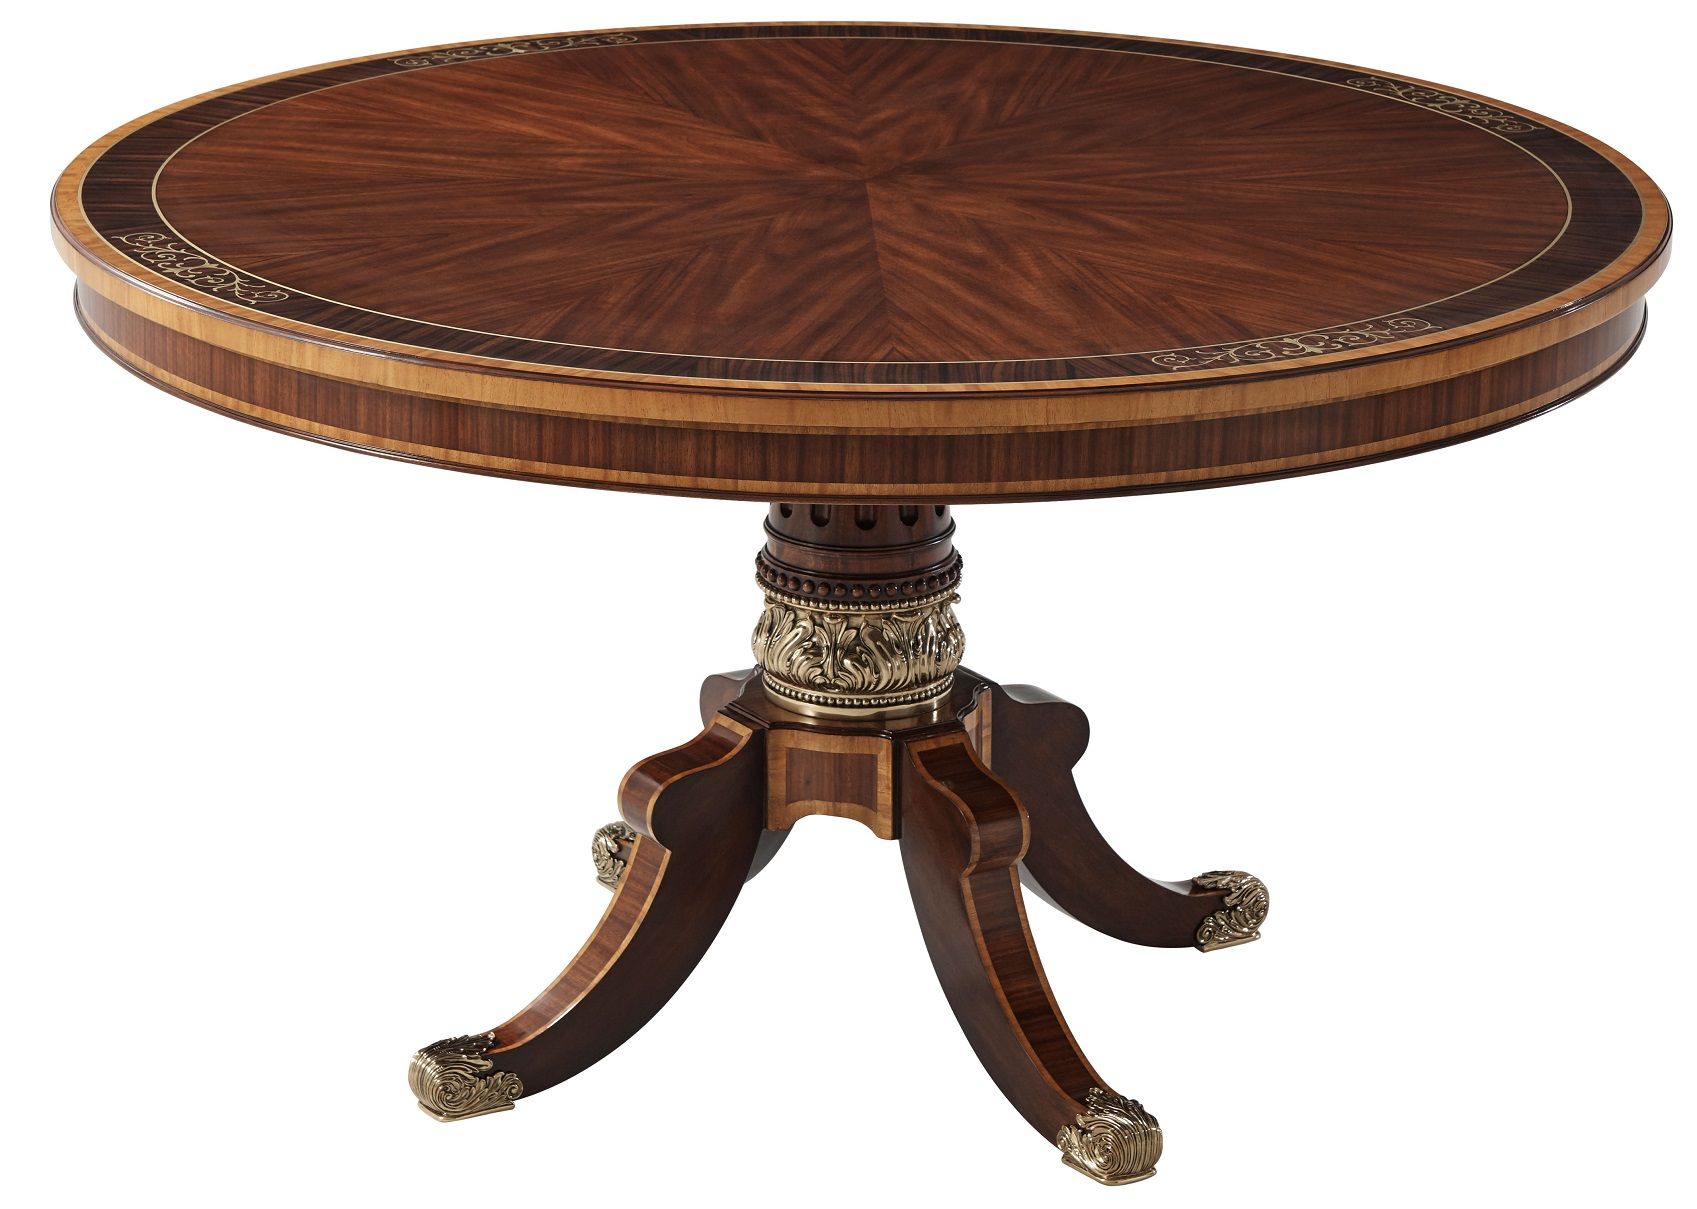 Formal dining or foyer table